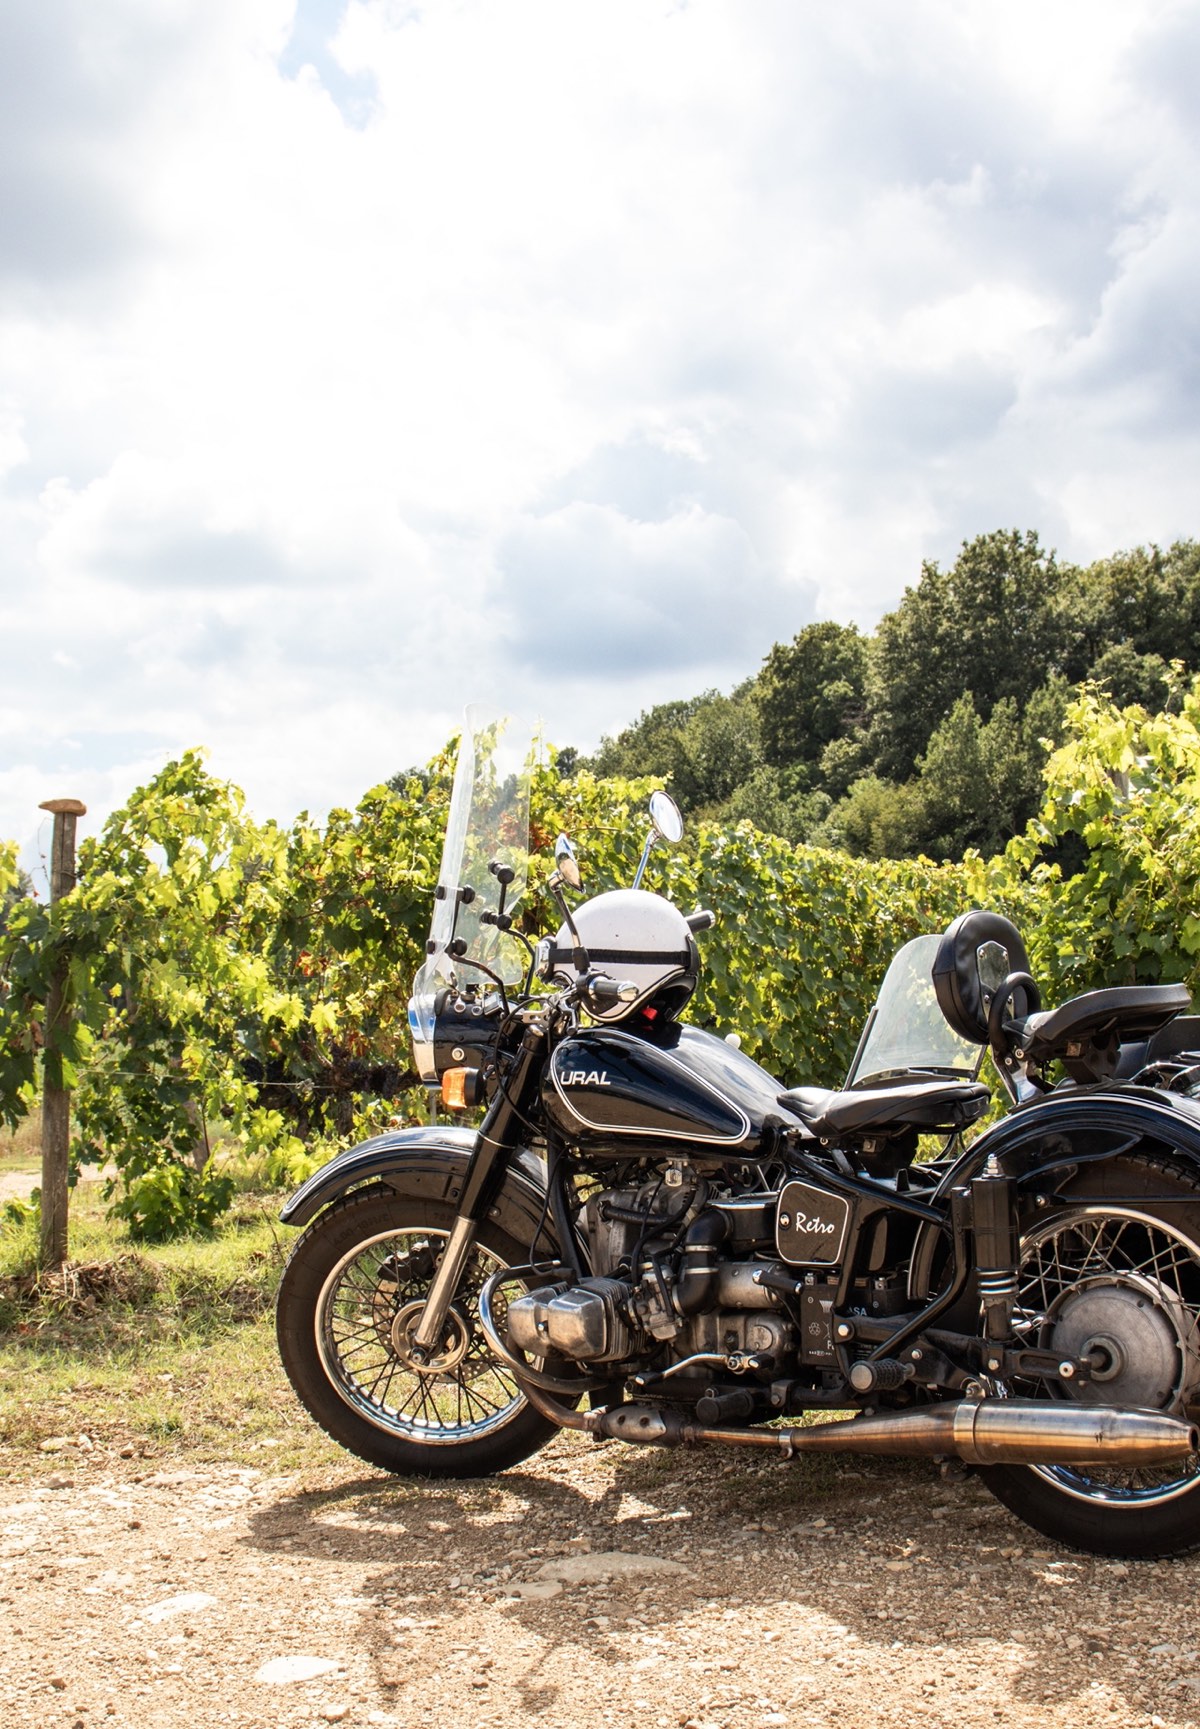 Sidecar Riding Experience In Florence & Tuscany